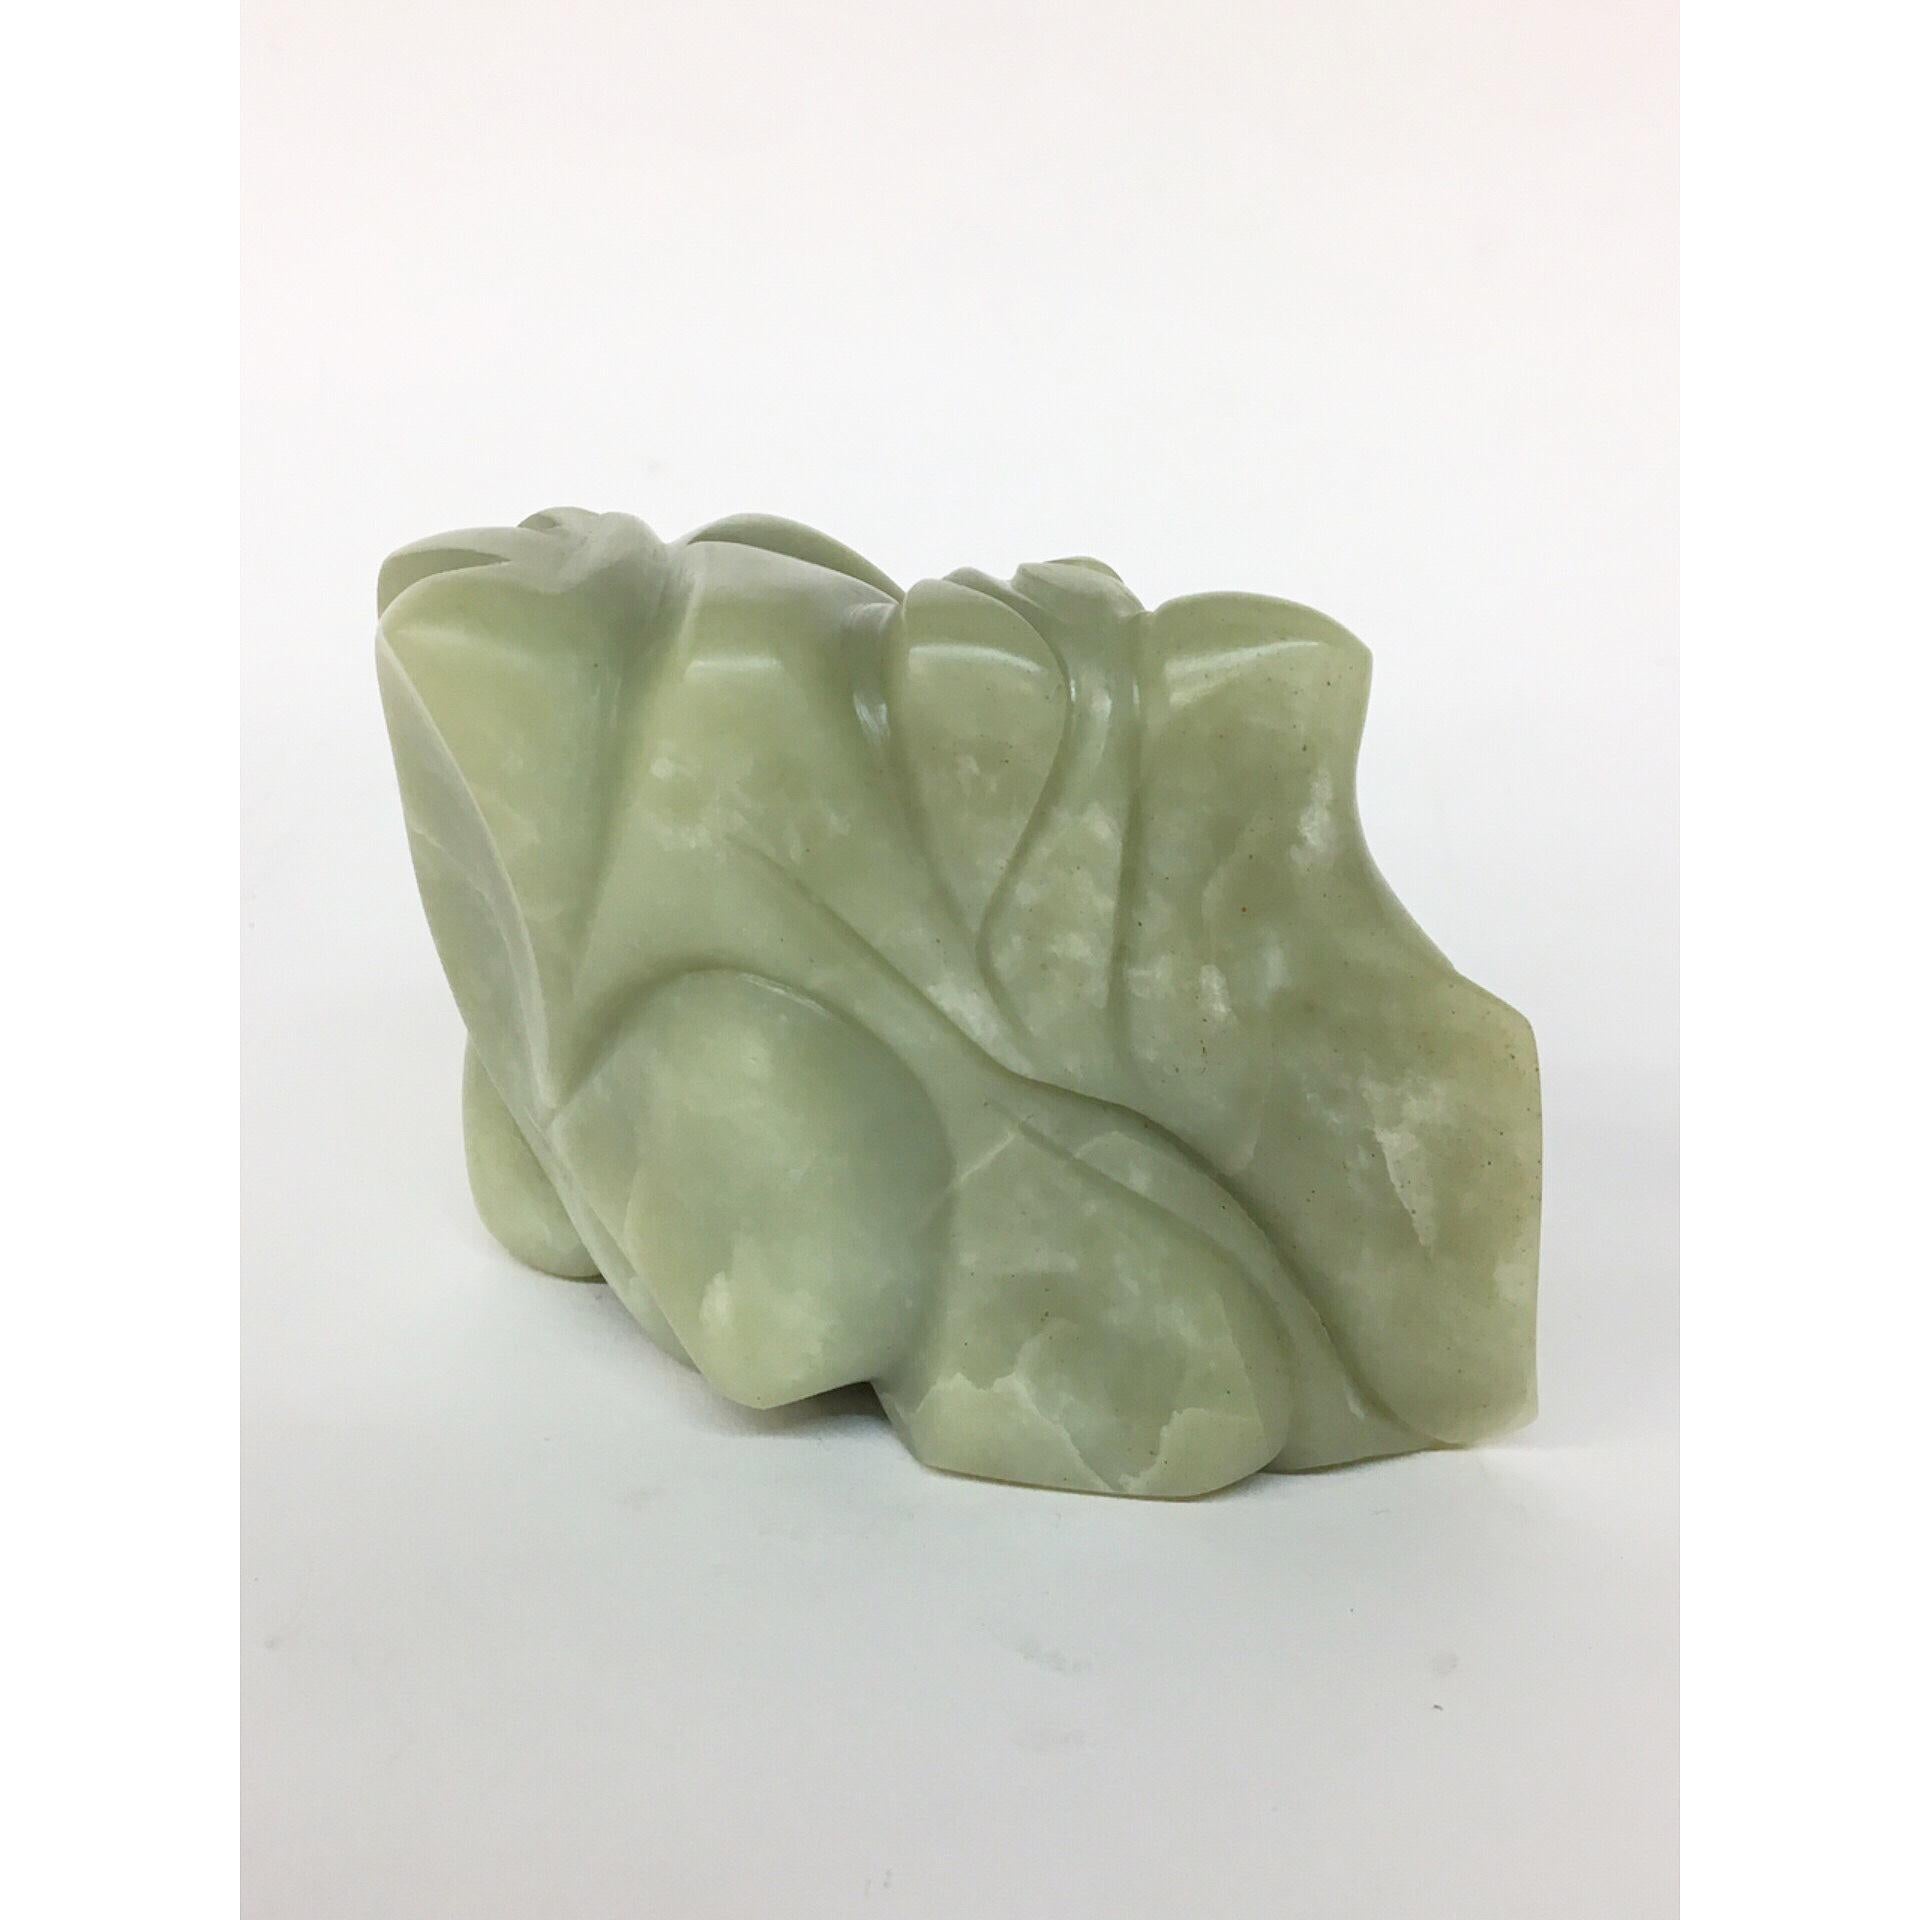 TANGLE Soapstone Sculpture 6 1/2 × 4 × 3 inch by Melanie Newcombe 5